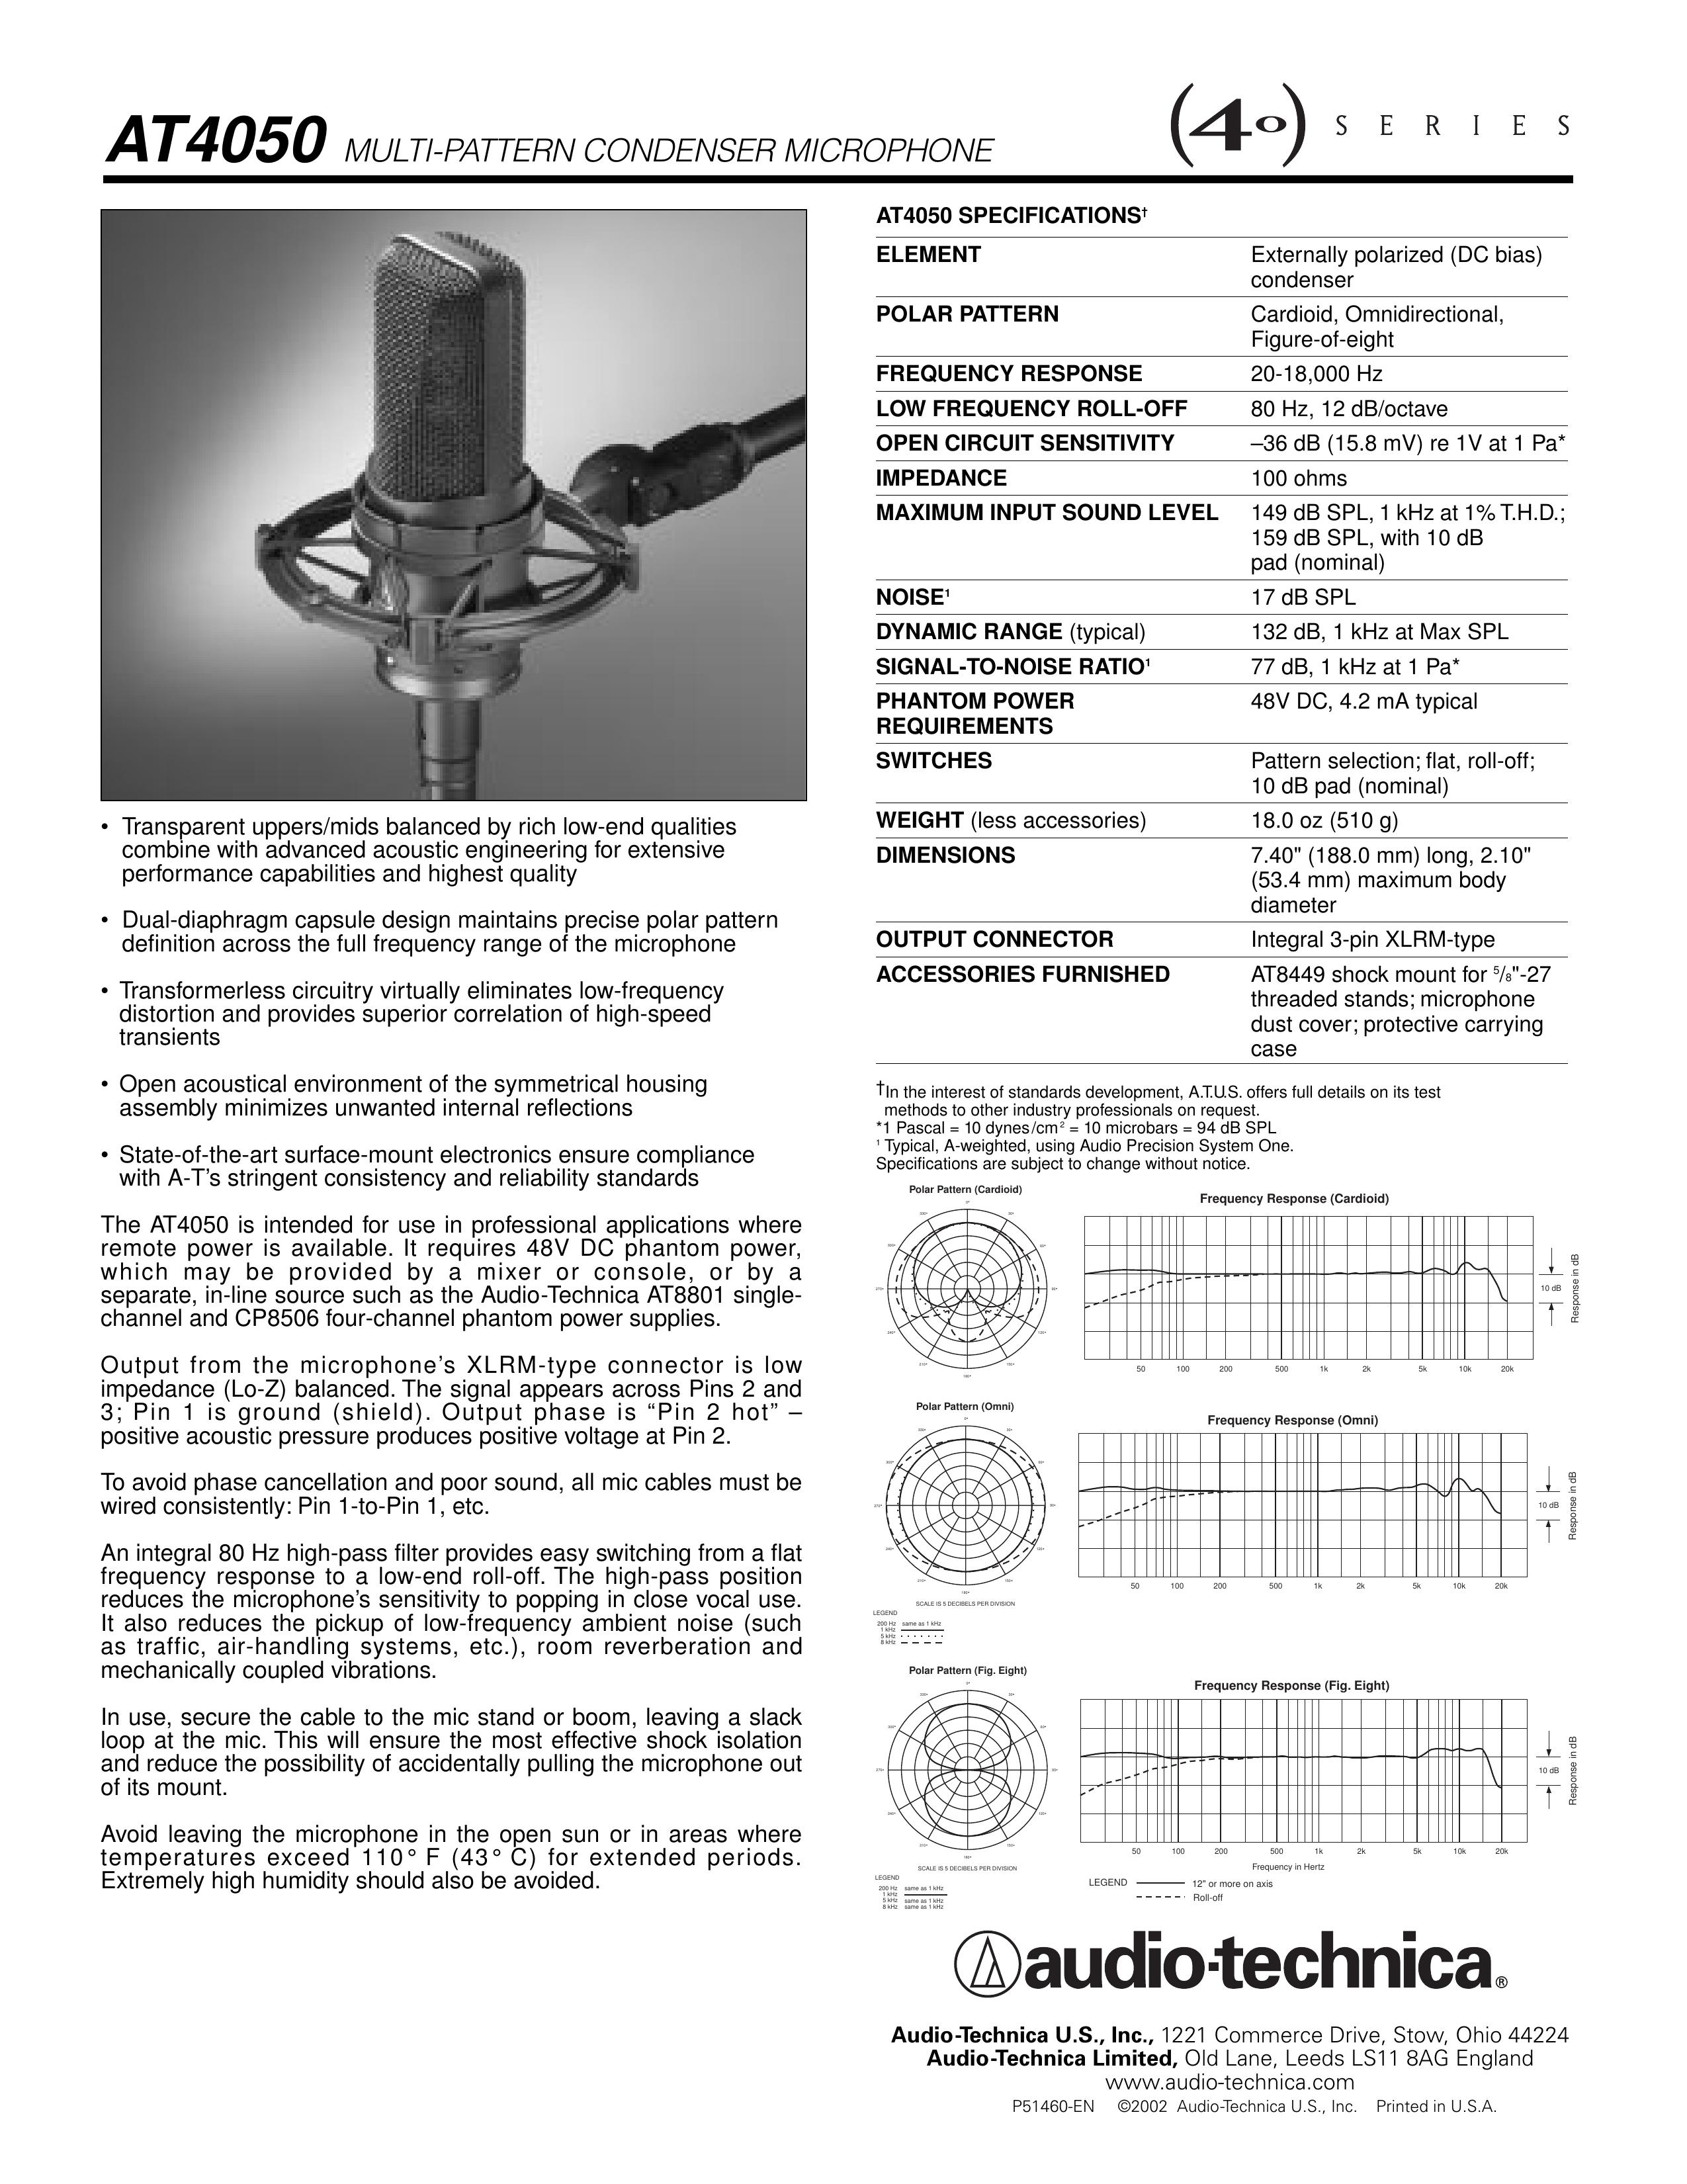 Audio-Technica AT4050 Microphone User Manual